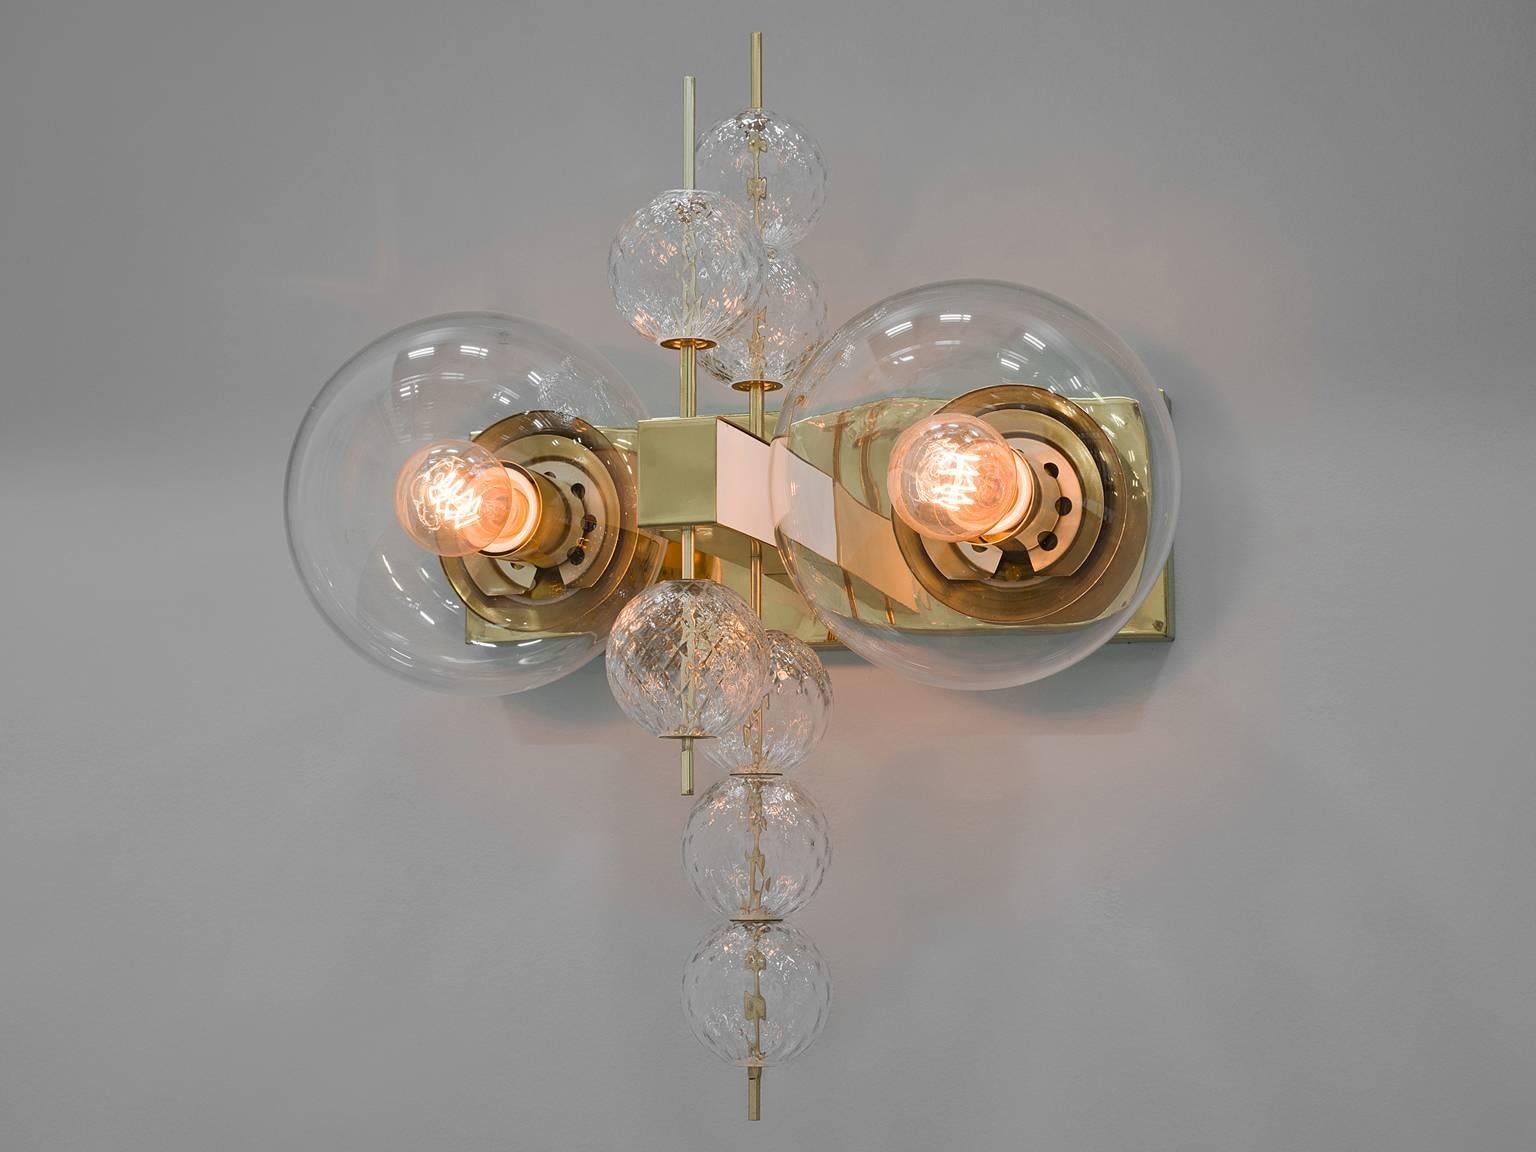 Chandelier in glass and brass, Europe, 1970s.

Ornate brass and glass wall light with two-light points and small decorative structured glass globes. The chandelier is beautifully decorated thanks to the structured glass. The clear glass shades